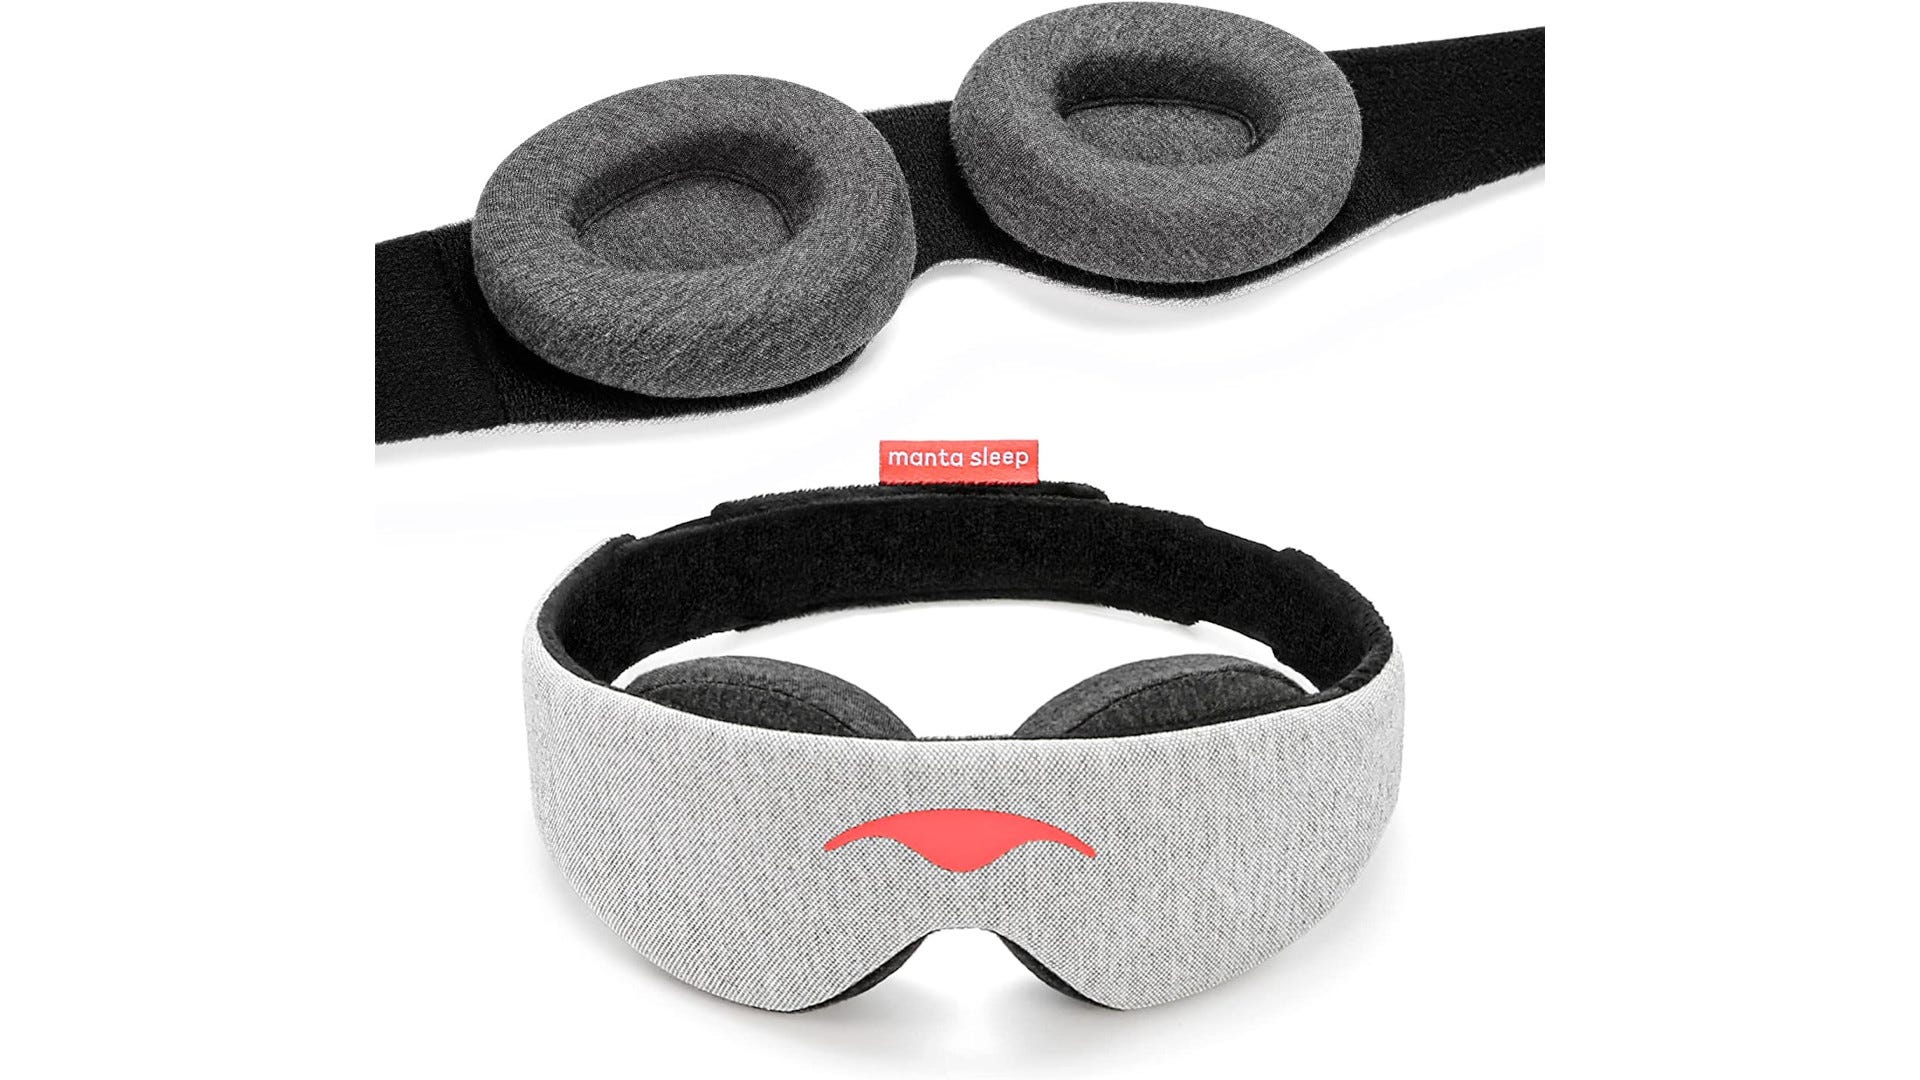 Two Manta Sleep Masks sit near each other. One is open and the other is closed.